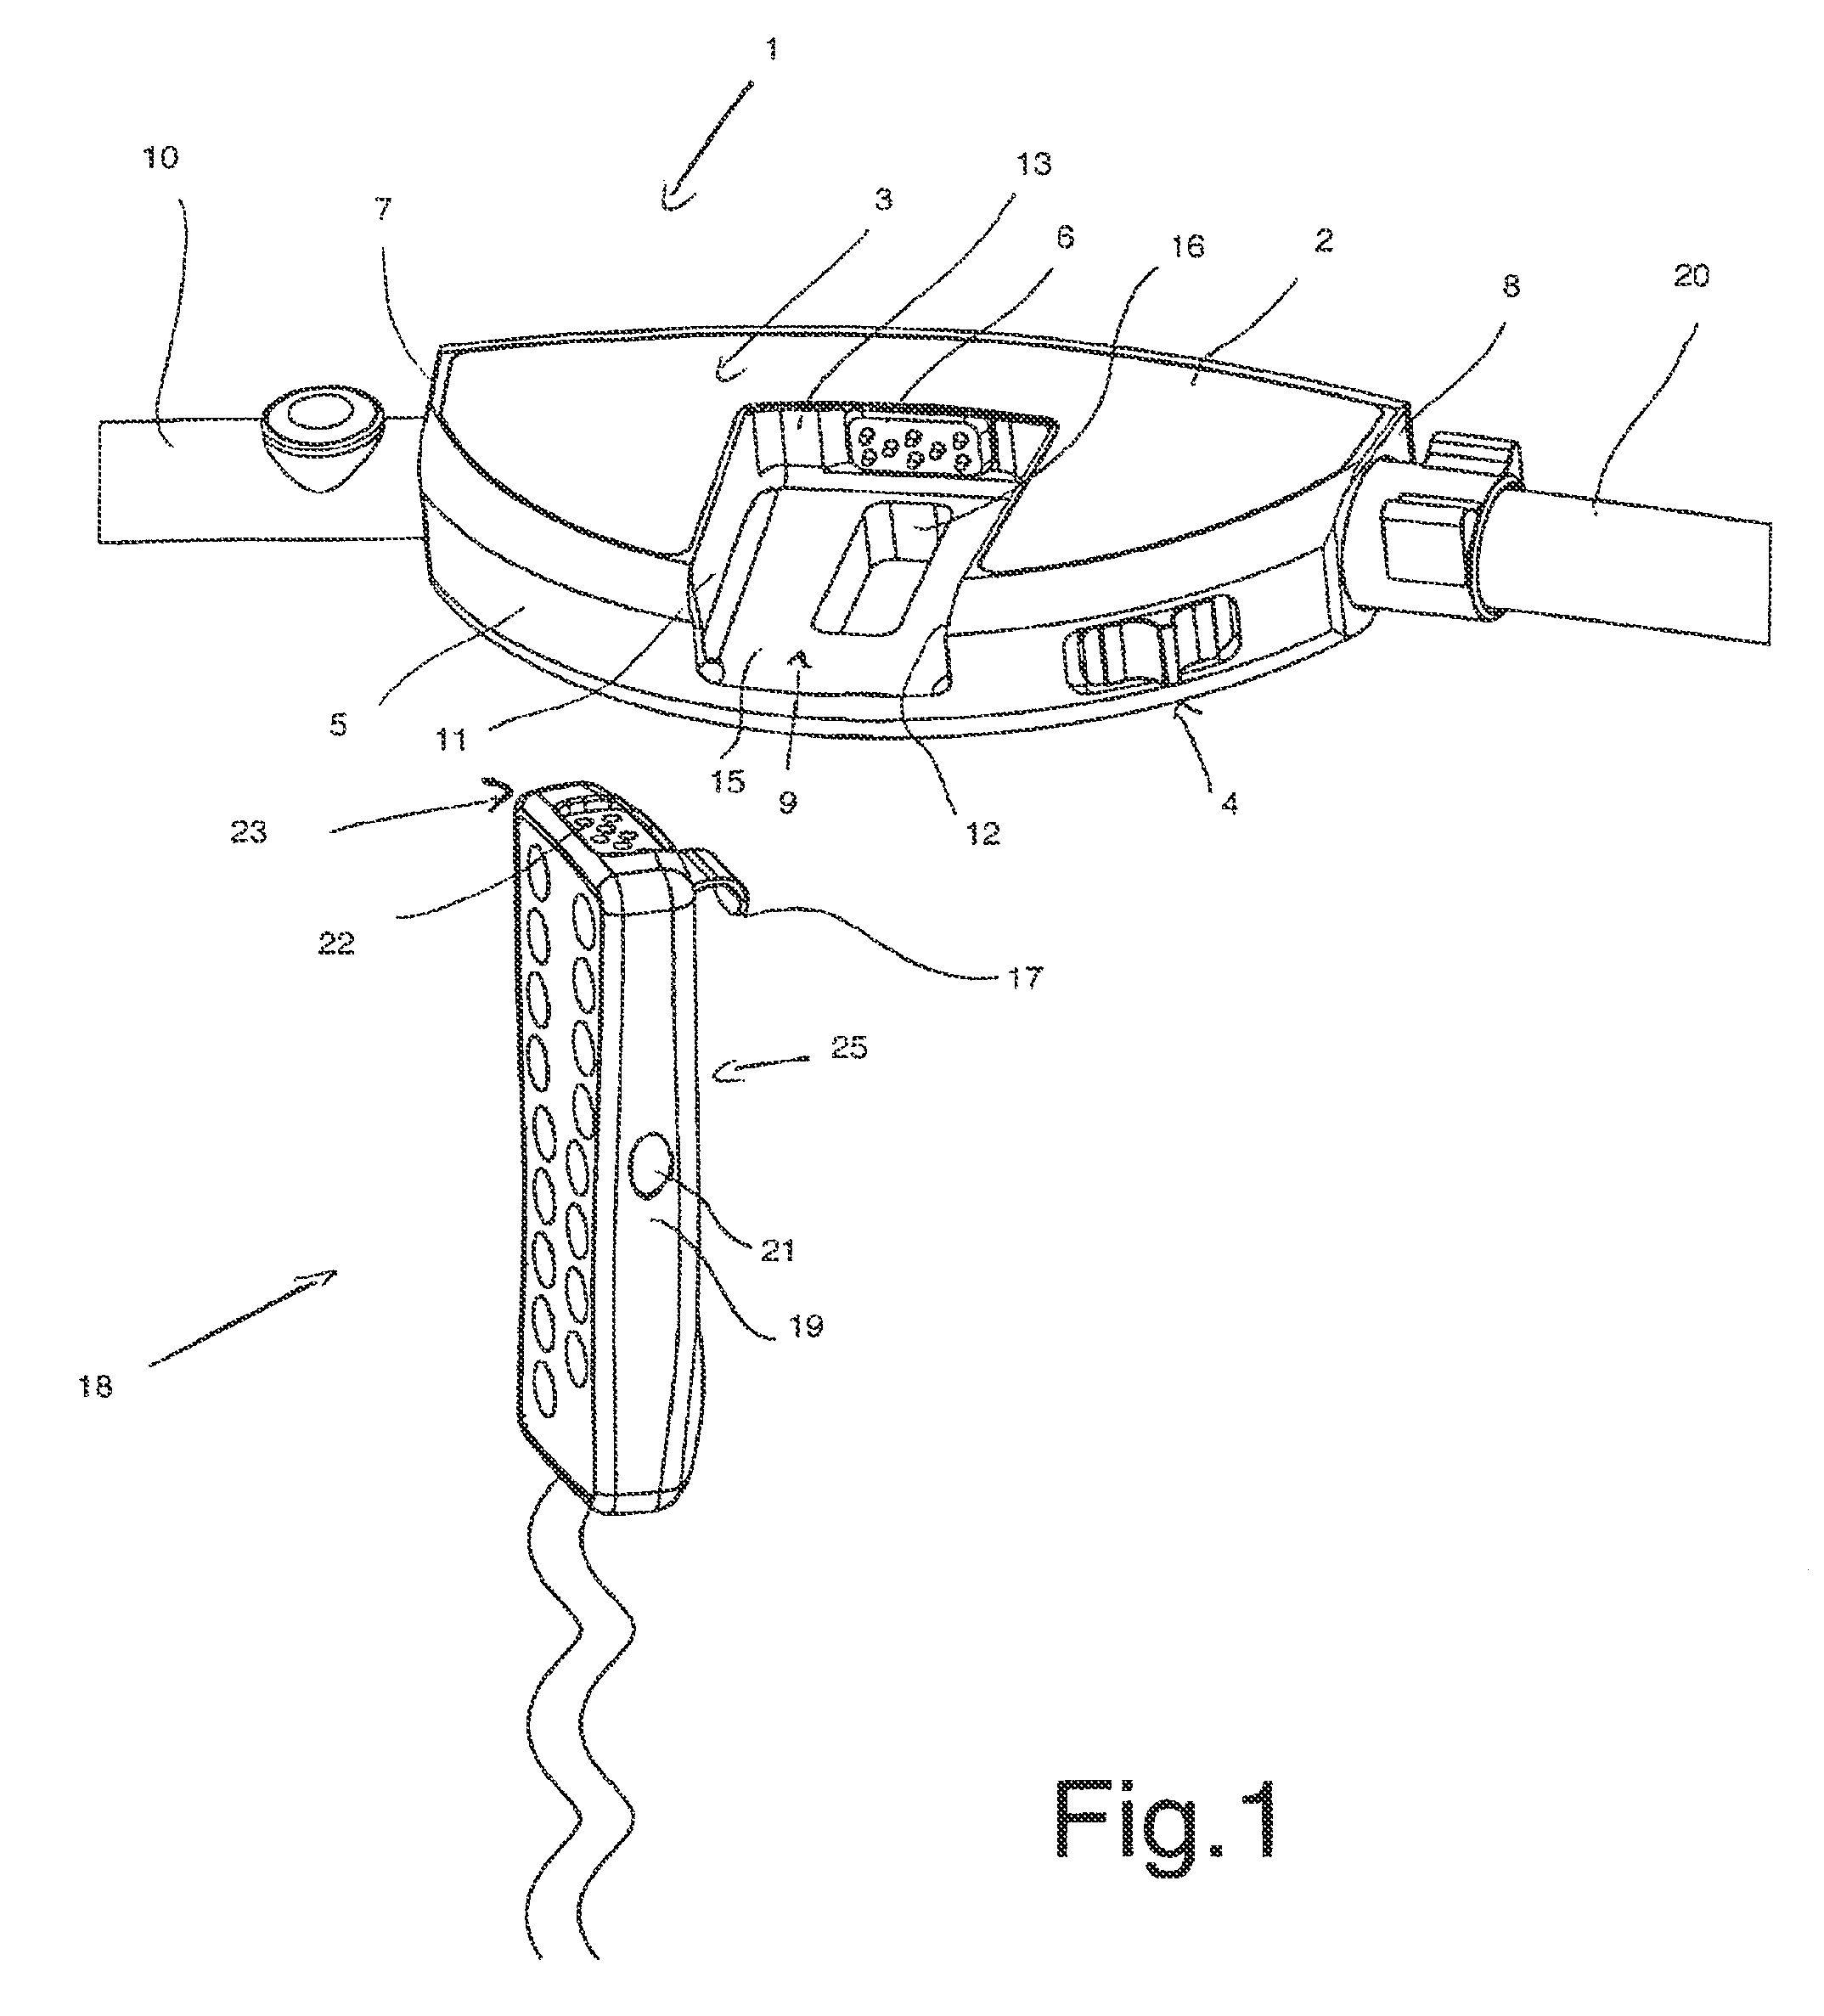 Guide device for a motorized table comprising a unit that groups the table controls together